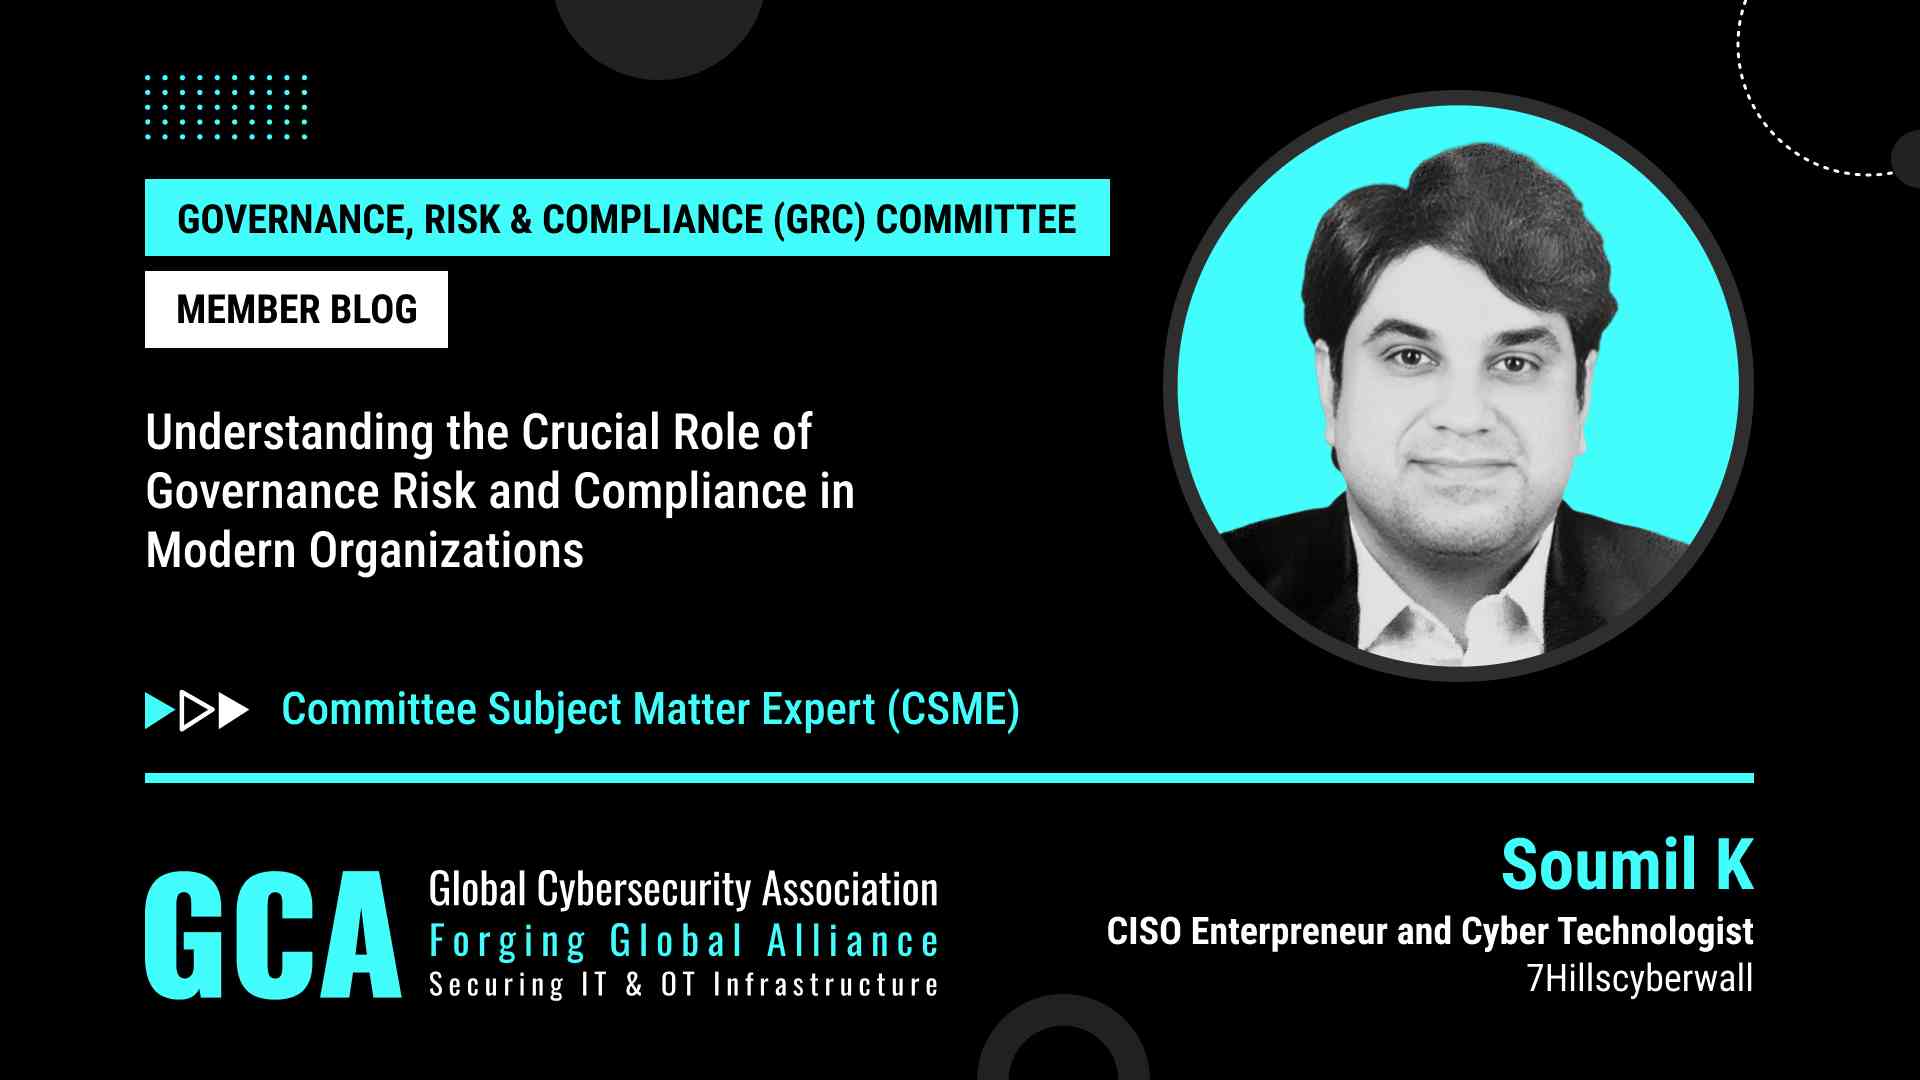 Understanding the Crucial Role of Governance Risk and Compliance in Modern Organizations